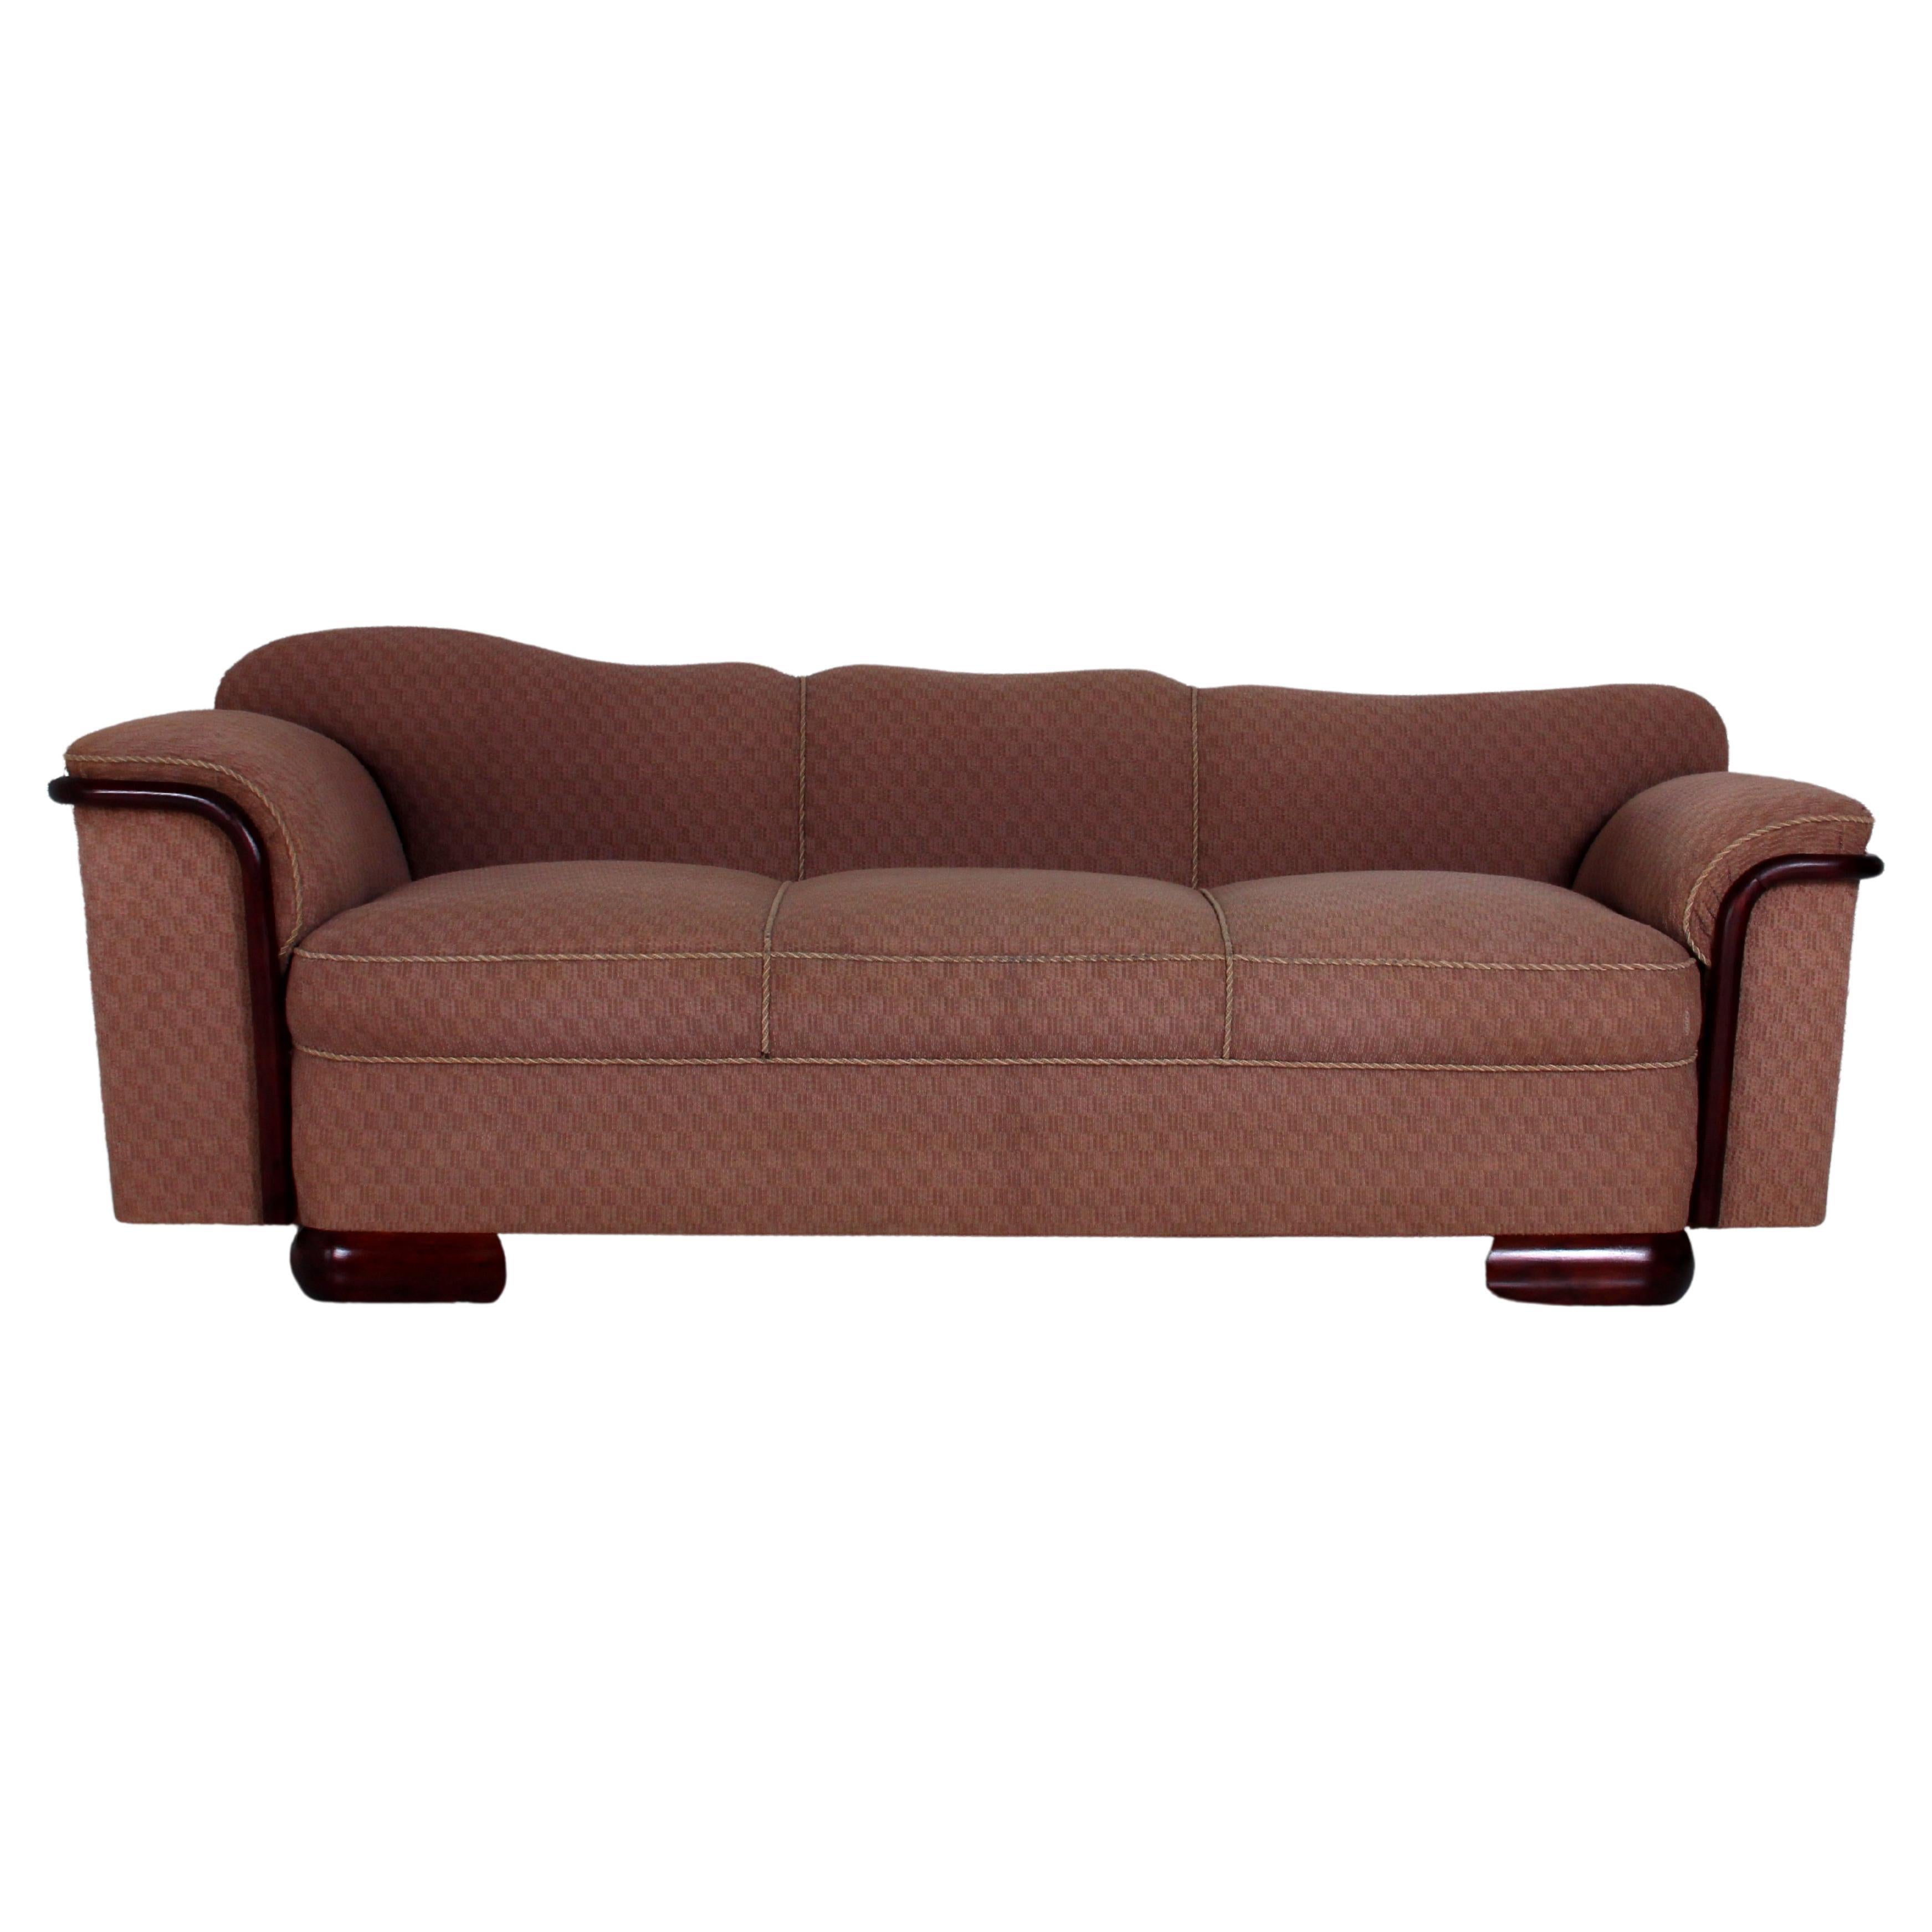 STRAIGHT classic art deco SOFA Dresden around 1930 or. fabric - wood refinished  For Sale